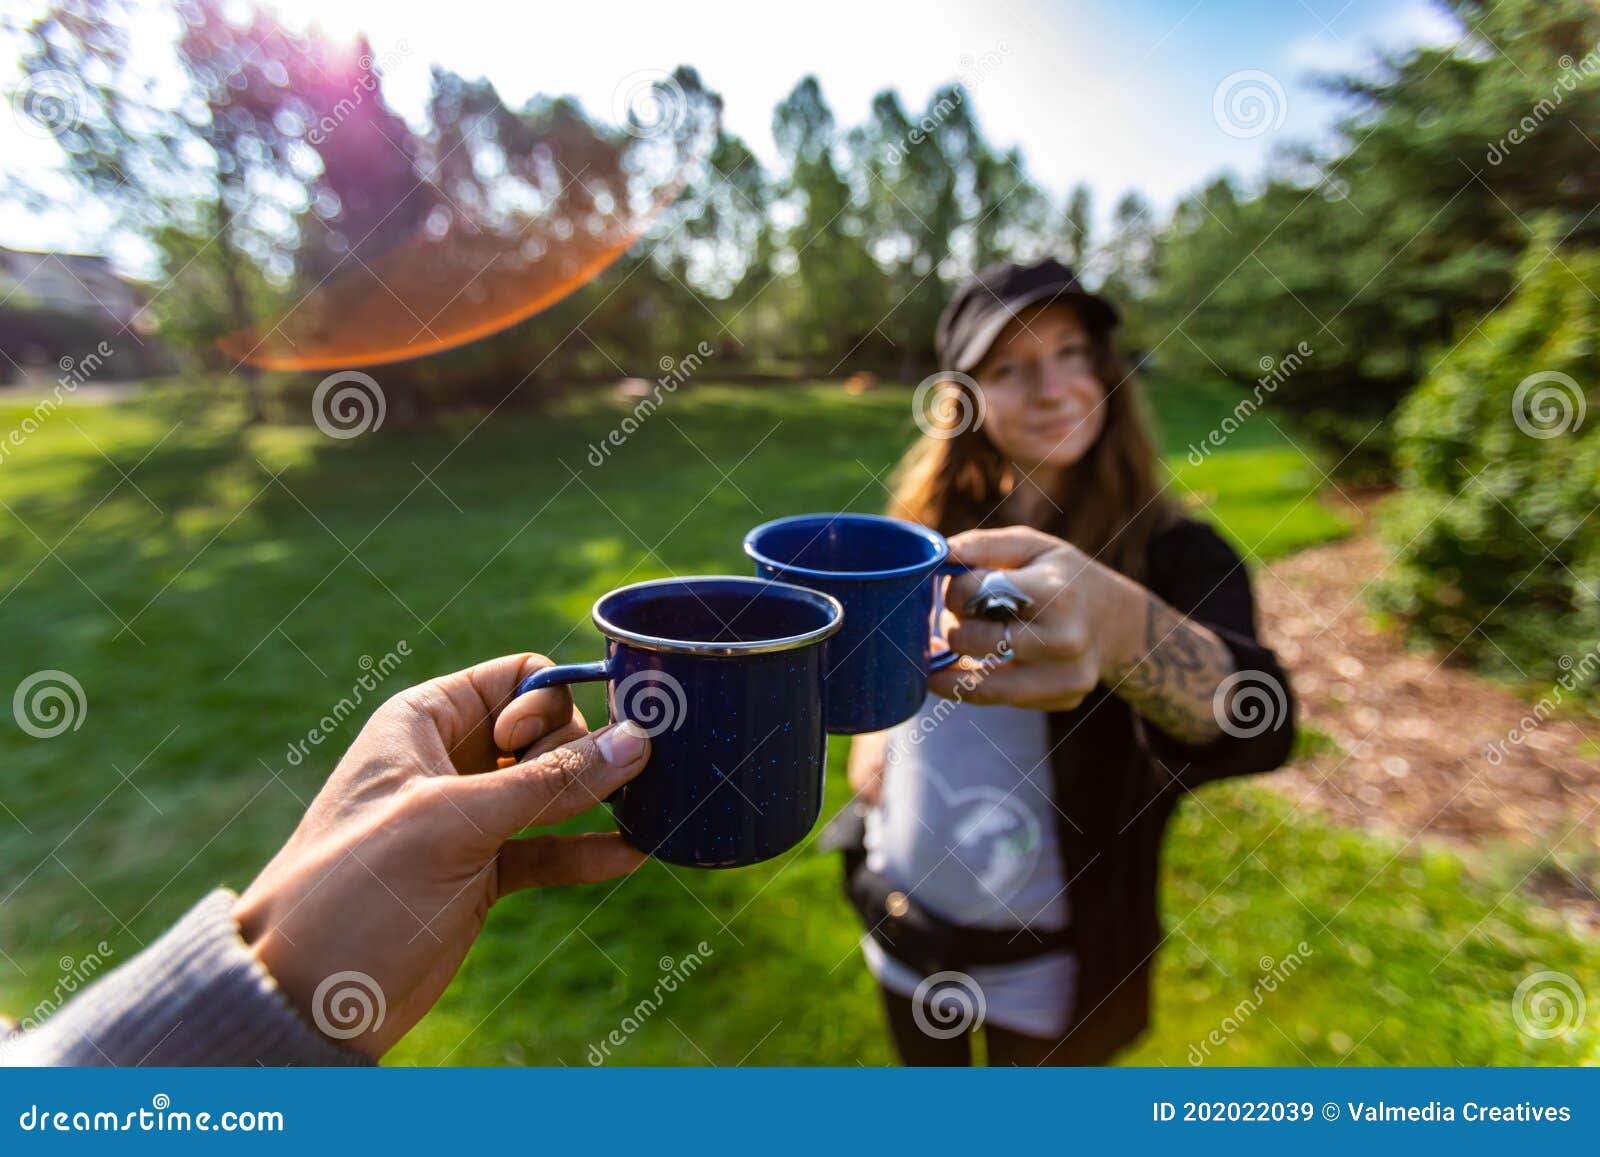 People Drinking Coffee and Tea Image - Image of date, 202022039